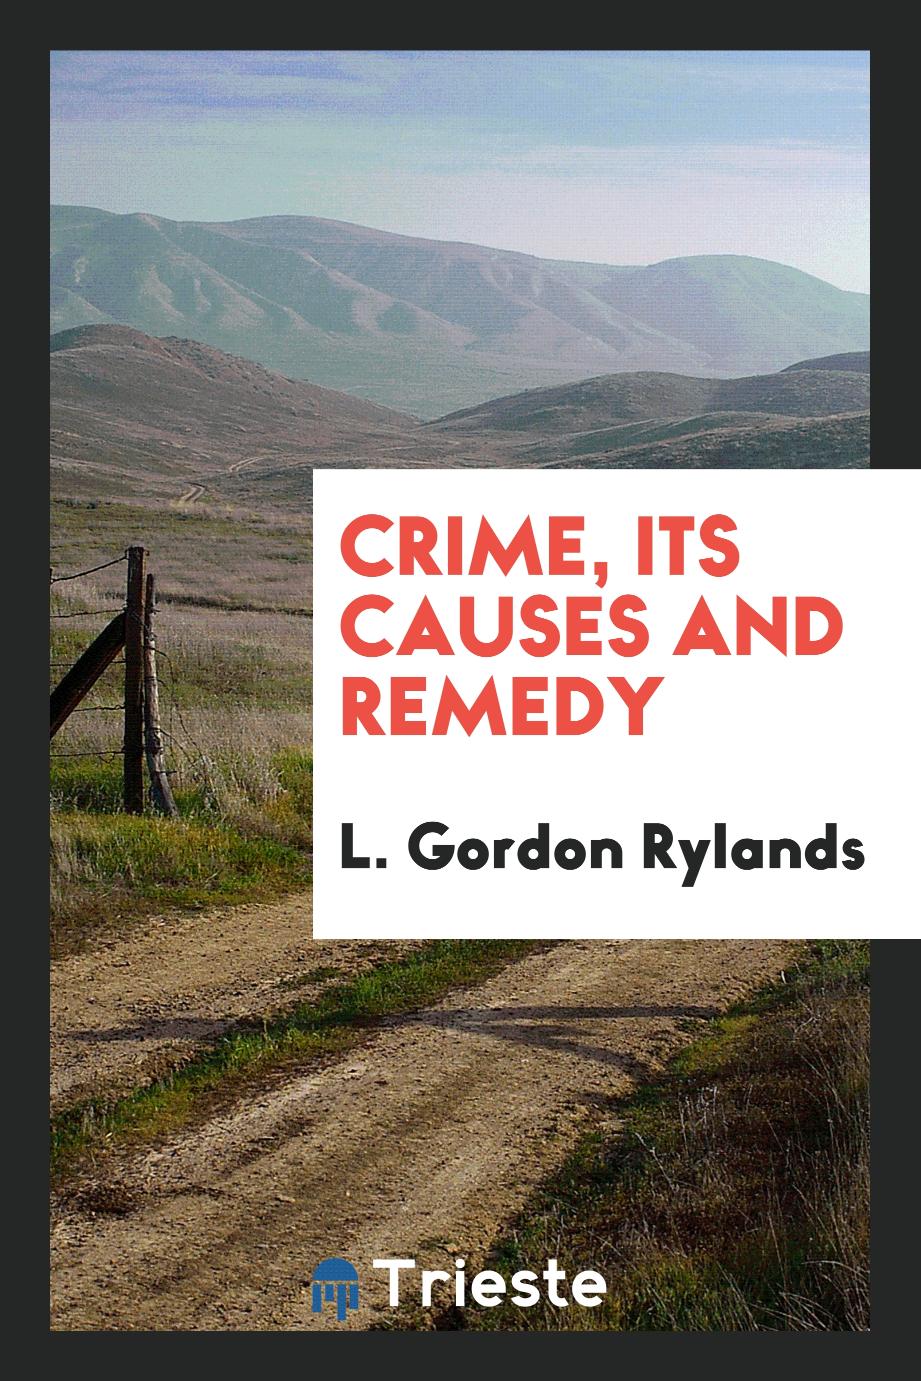 Crime, its causes and remedy